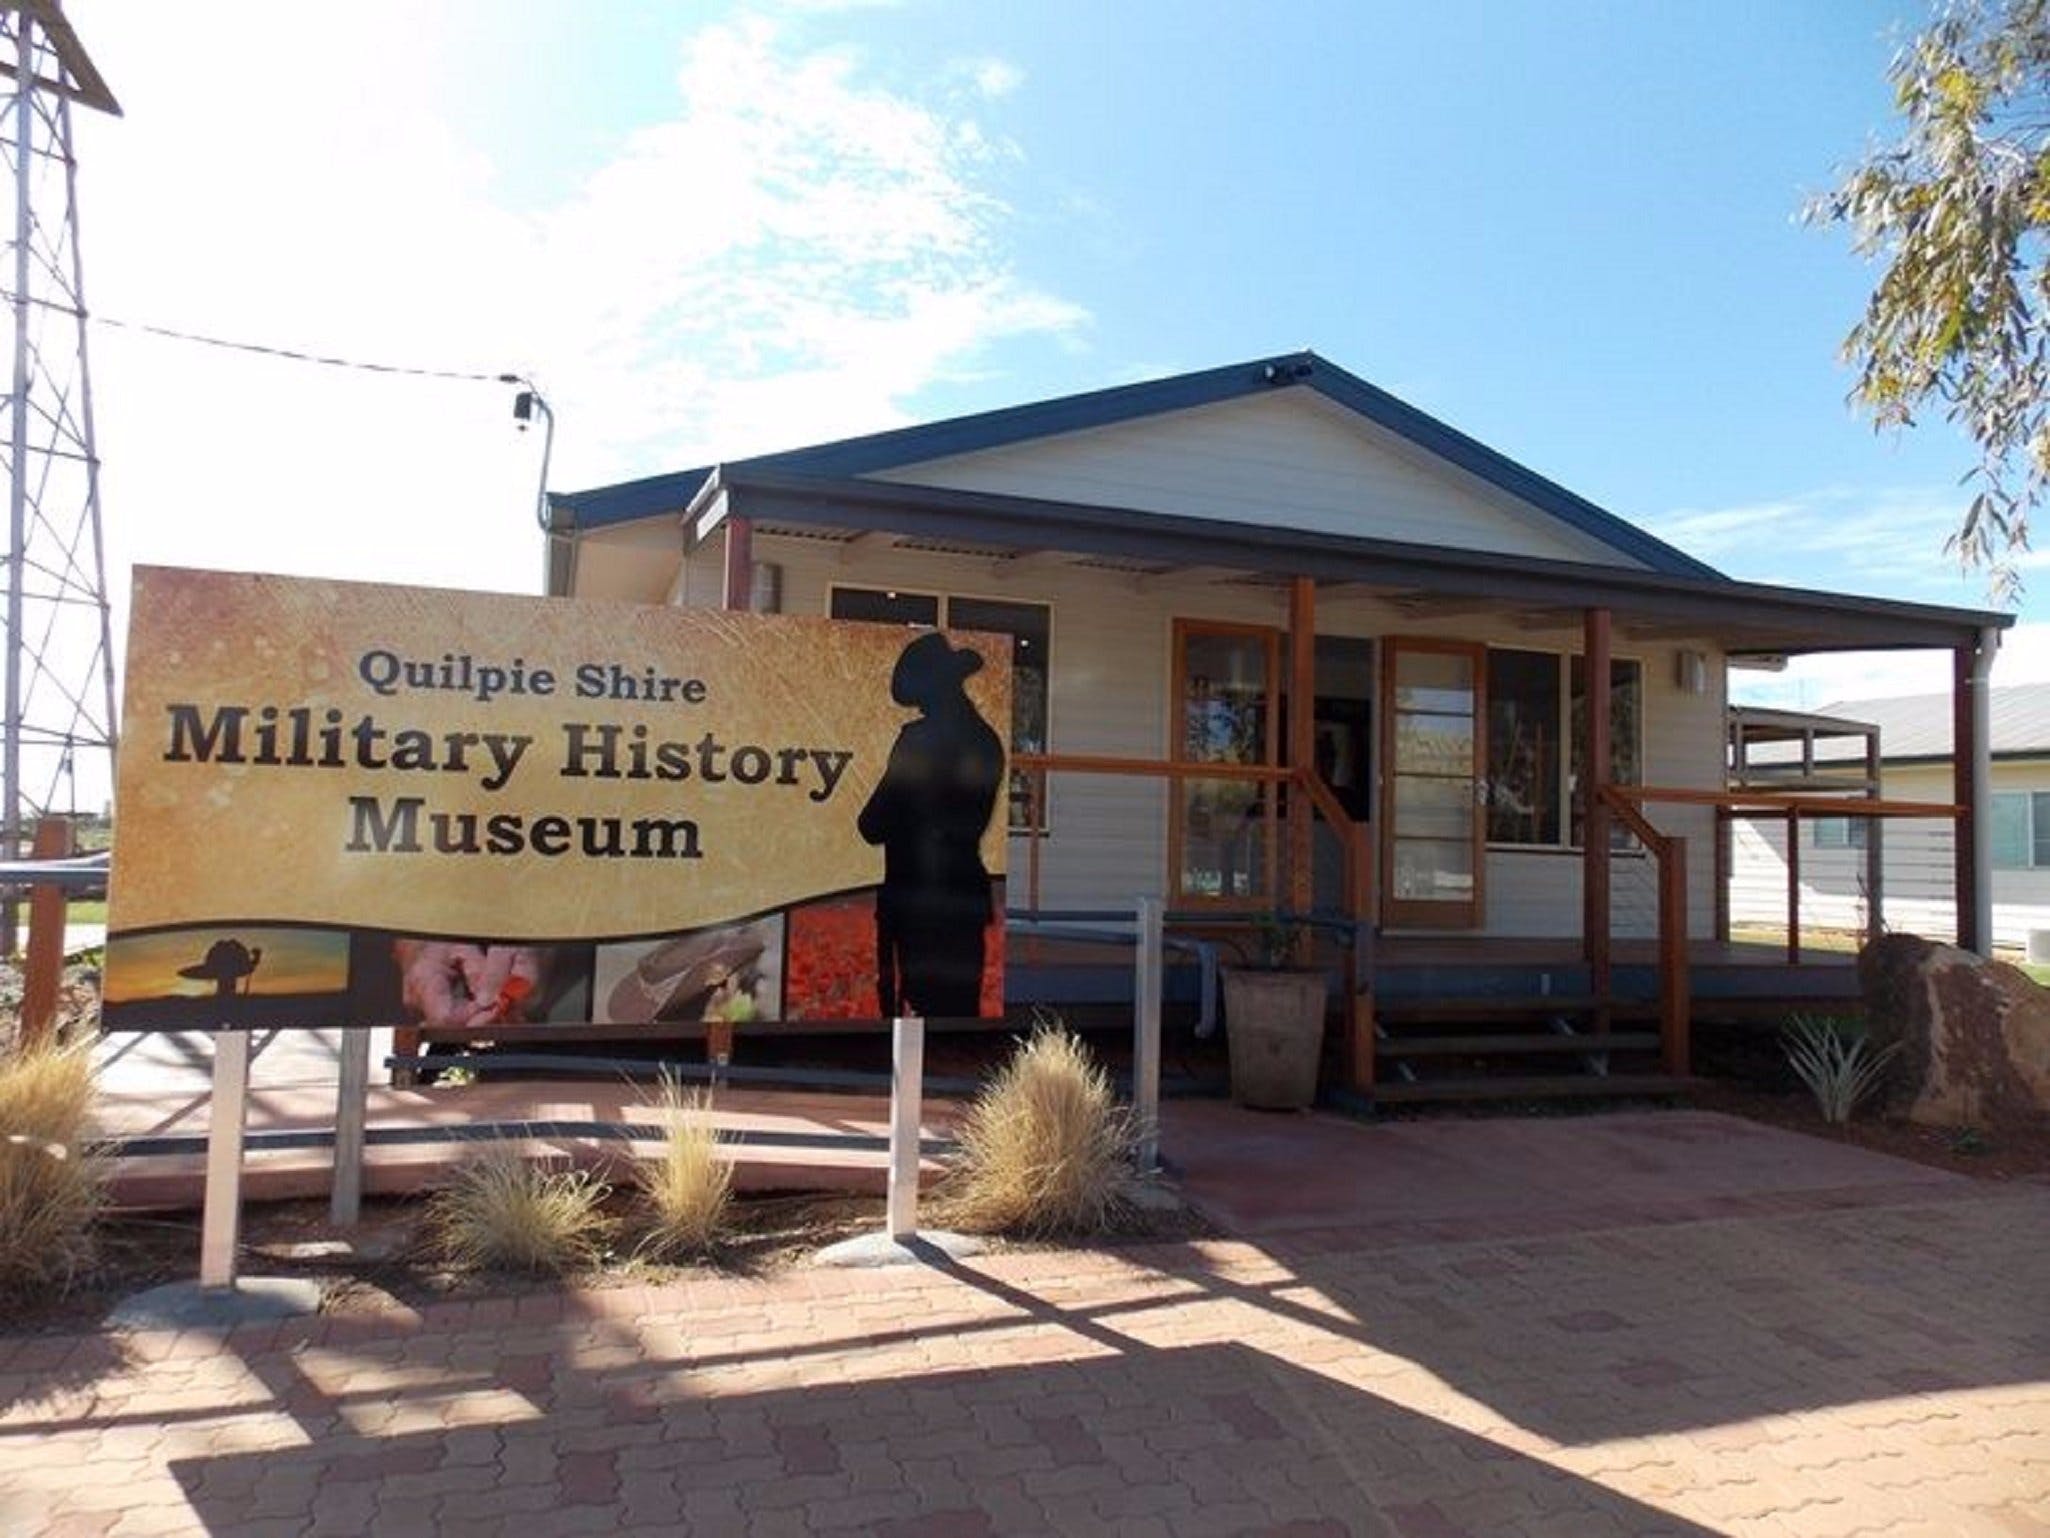 Quilpie Shire Military History Museum - Accommodation Brunswick Heads